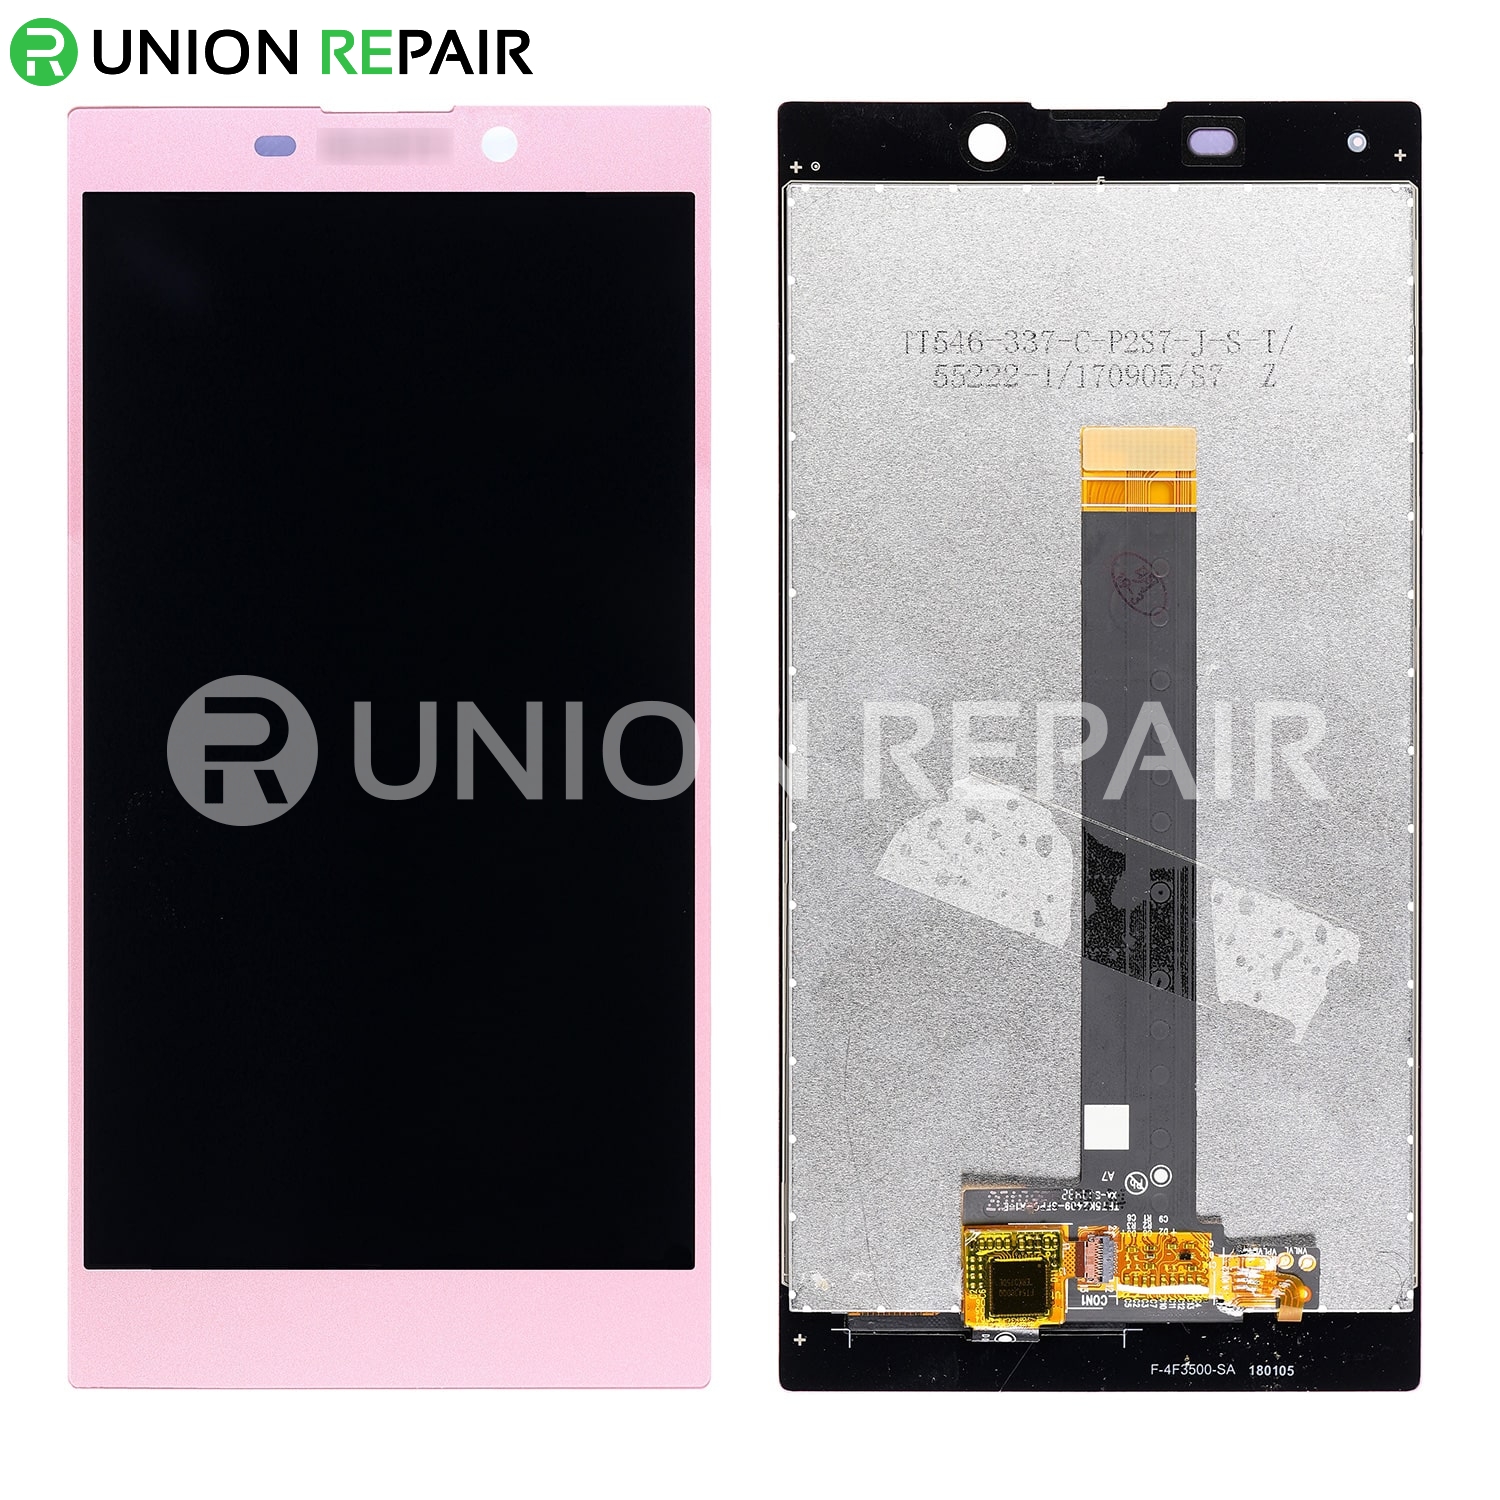 Replacement Sony Xperia L2 LCD Screen with Digitizer Assembly - Pink